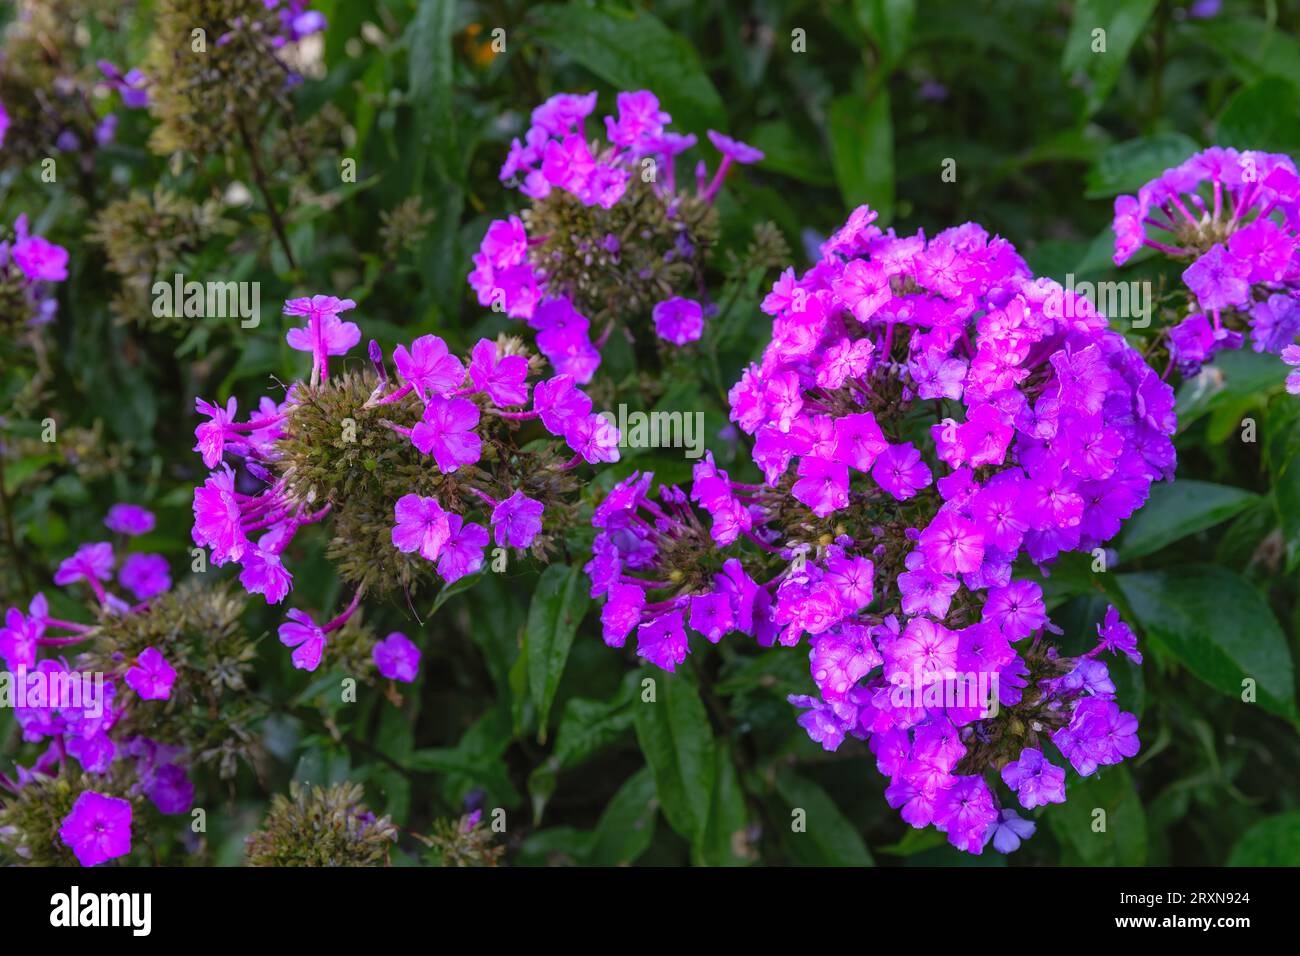 Scences and close ups of plants and flowers with in this public garden. Stock Photo